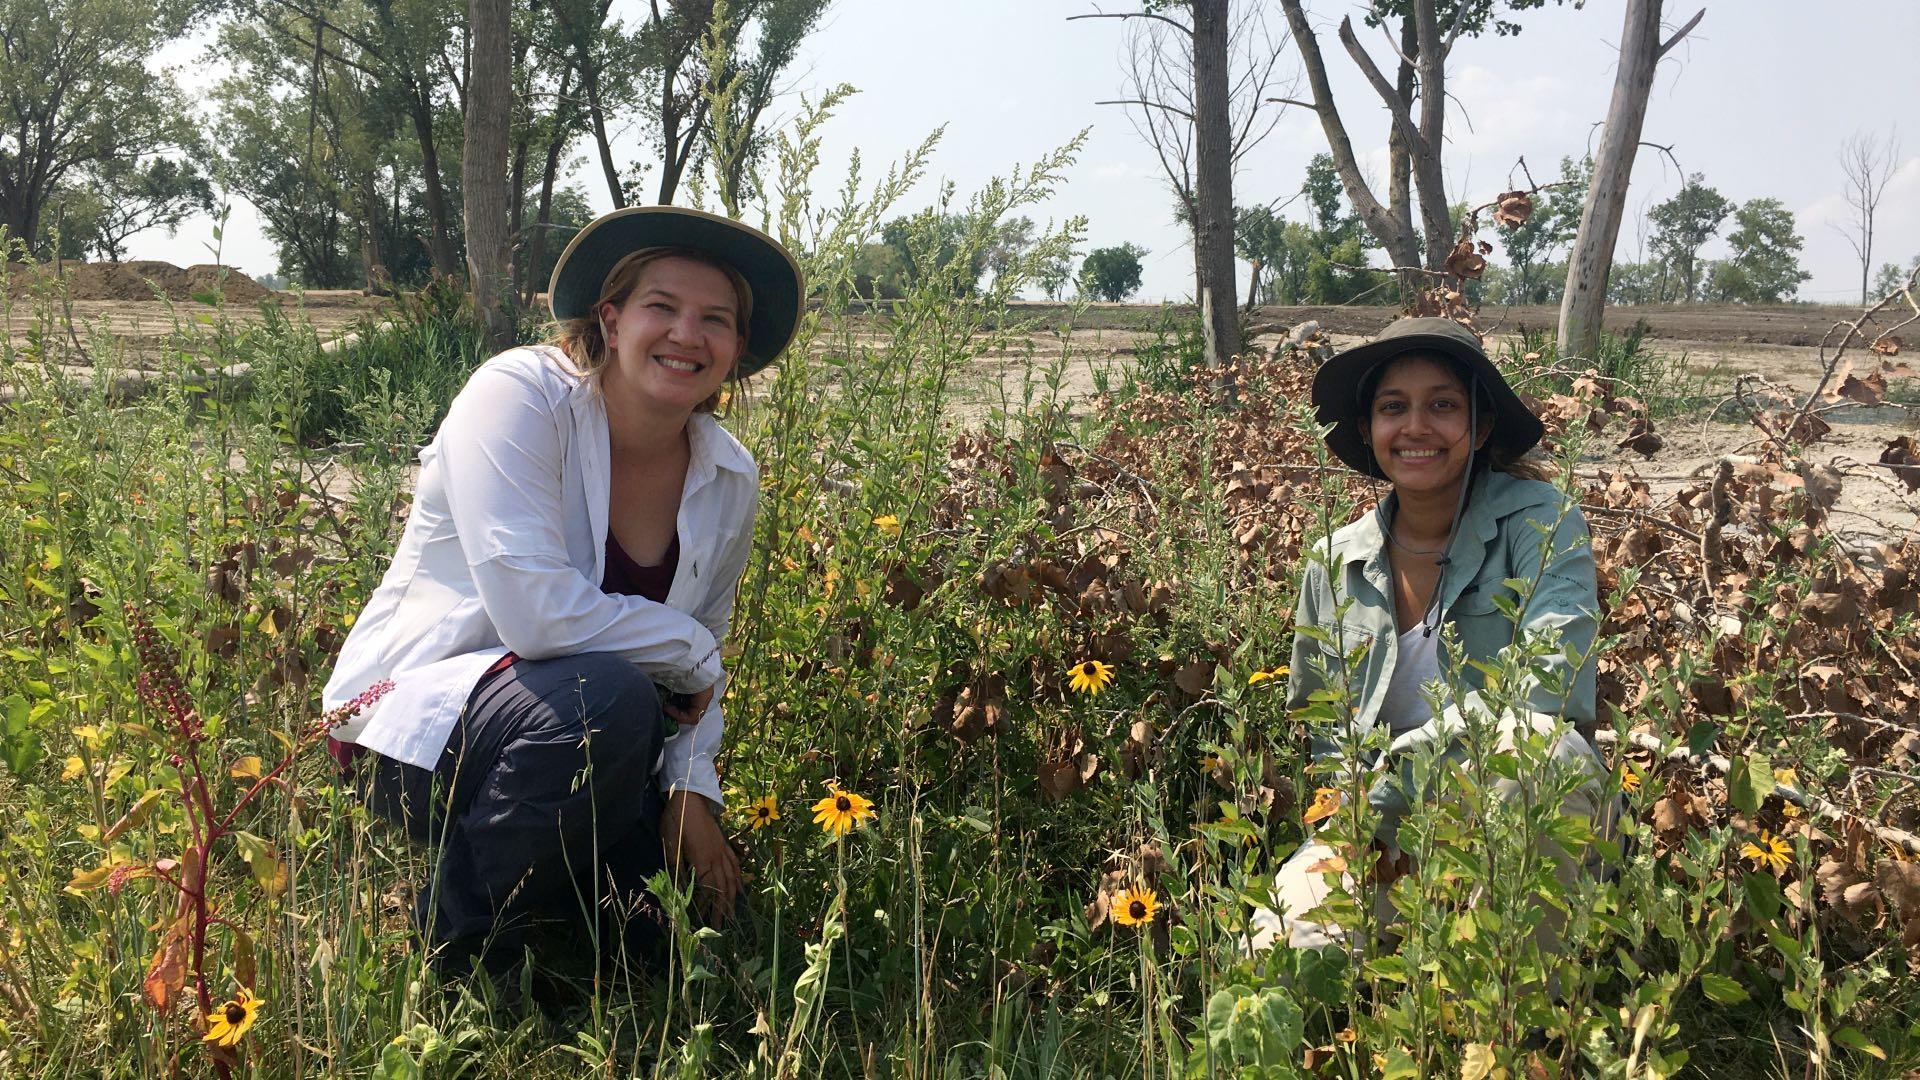 Lauren Umek of the Park District and research assistant Alifya Saify at Big Marsh Park. (Courtesy of Chicago Park District) 